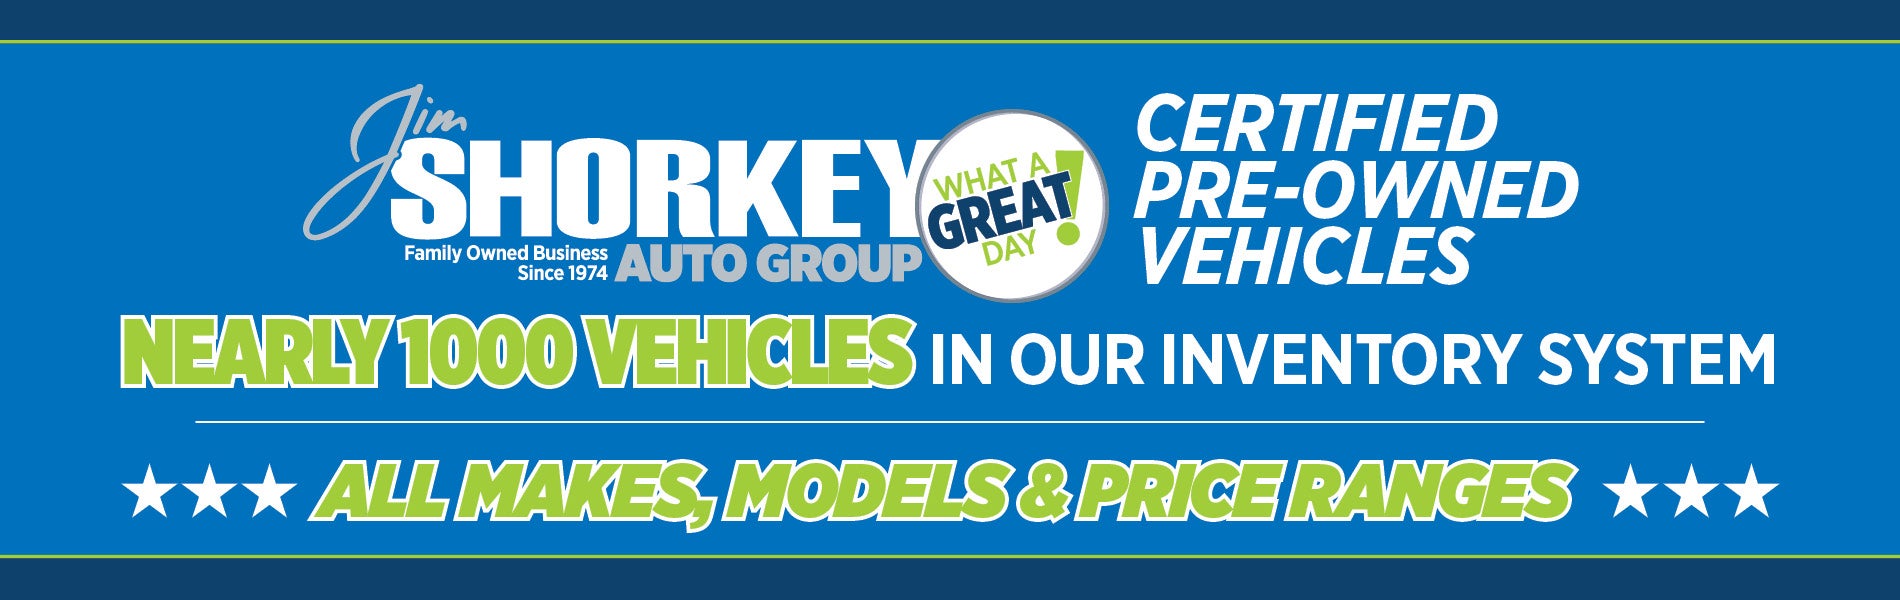 available certified pre owned vehicles